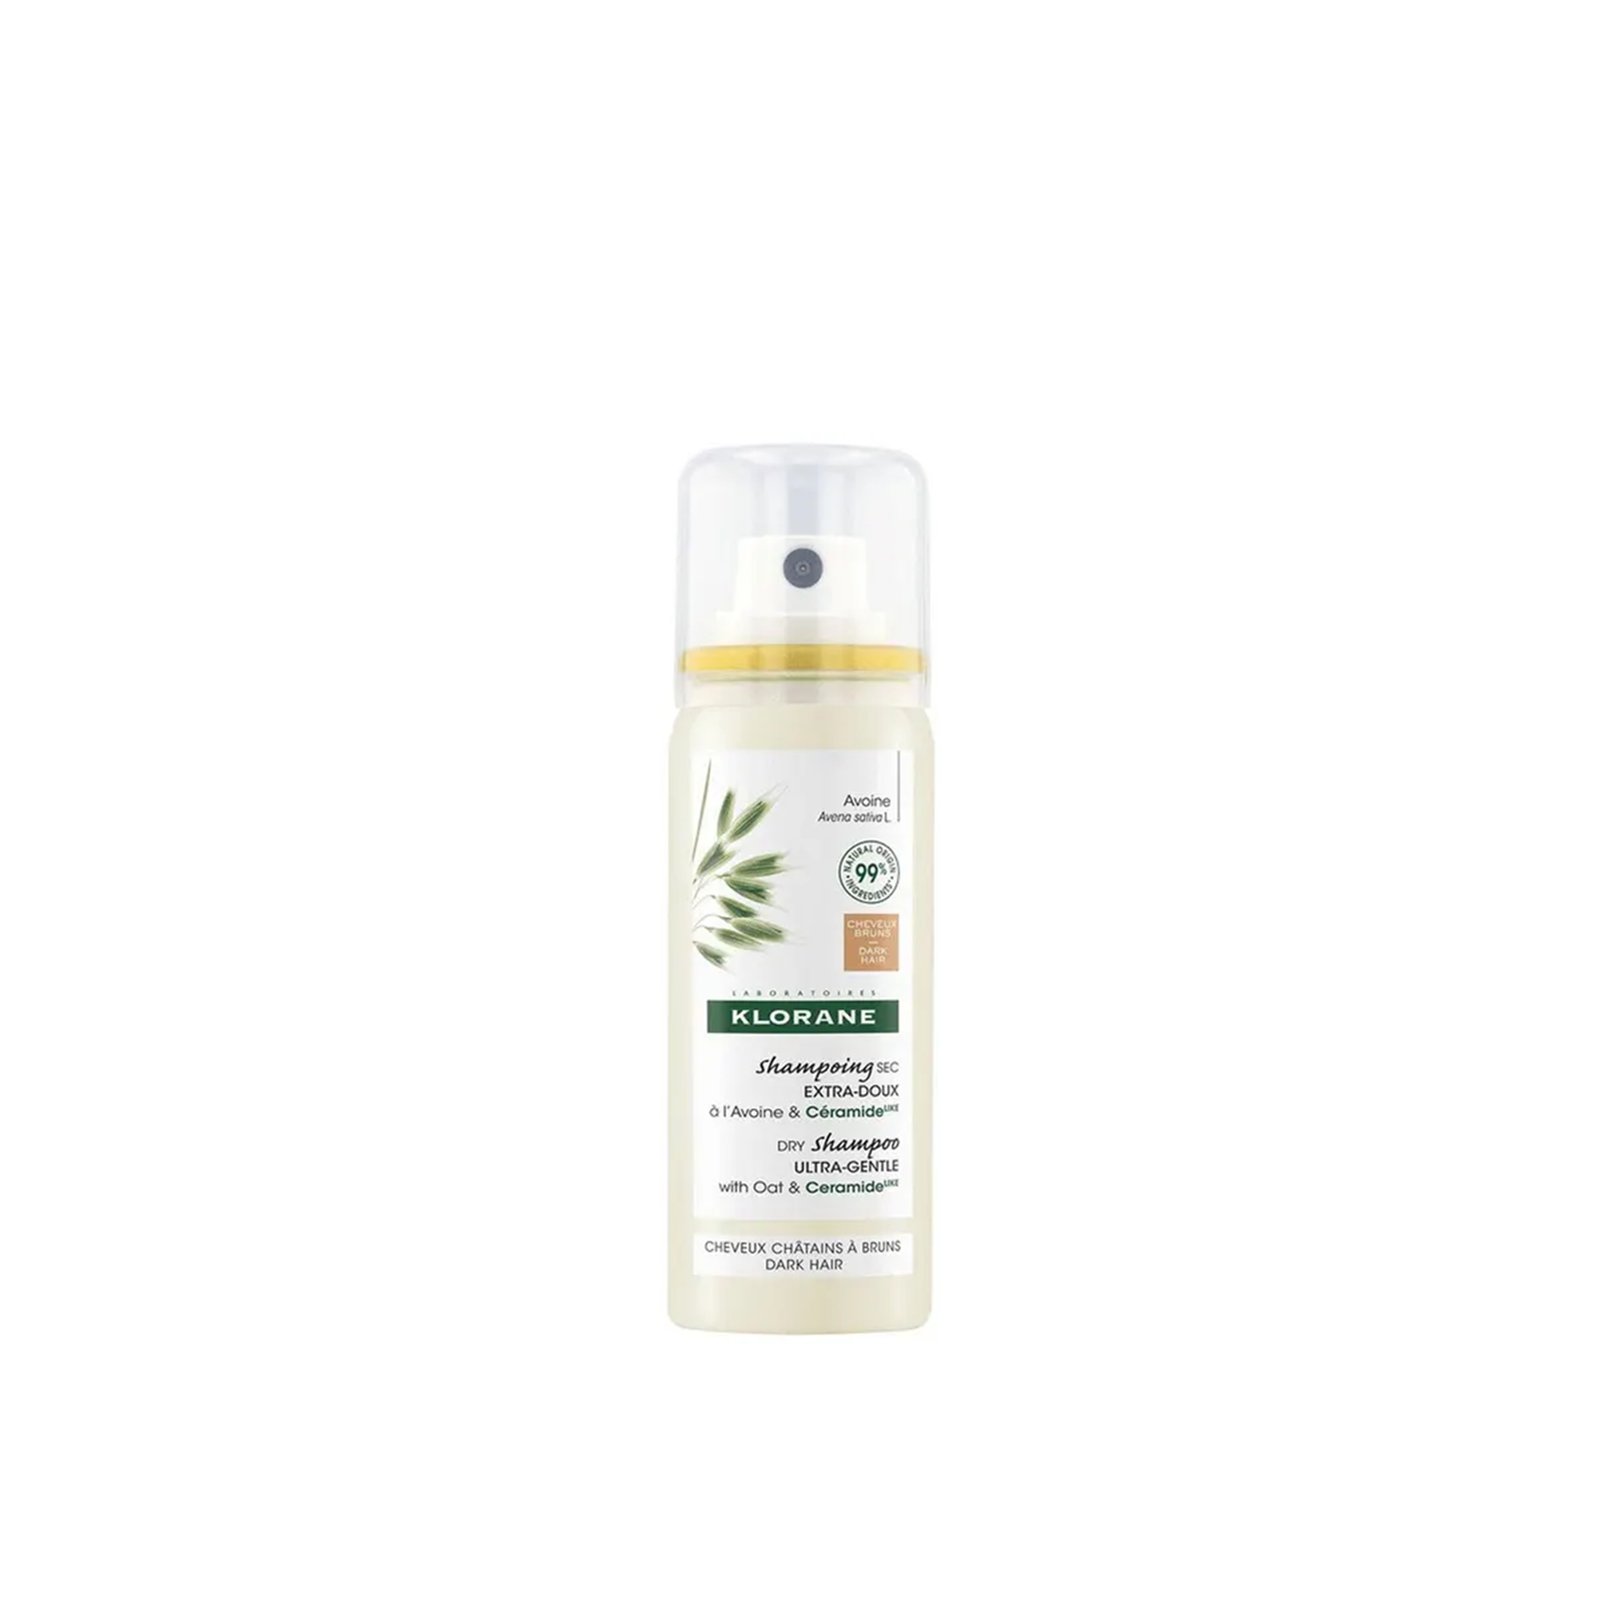 Klorane Dry Shampoo Natural Tinted Oat Extract 50ml (1.69floz)